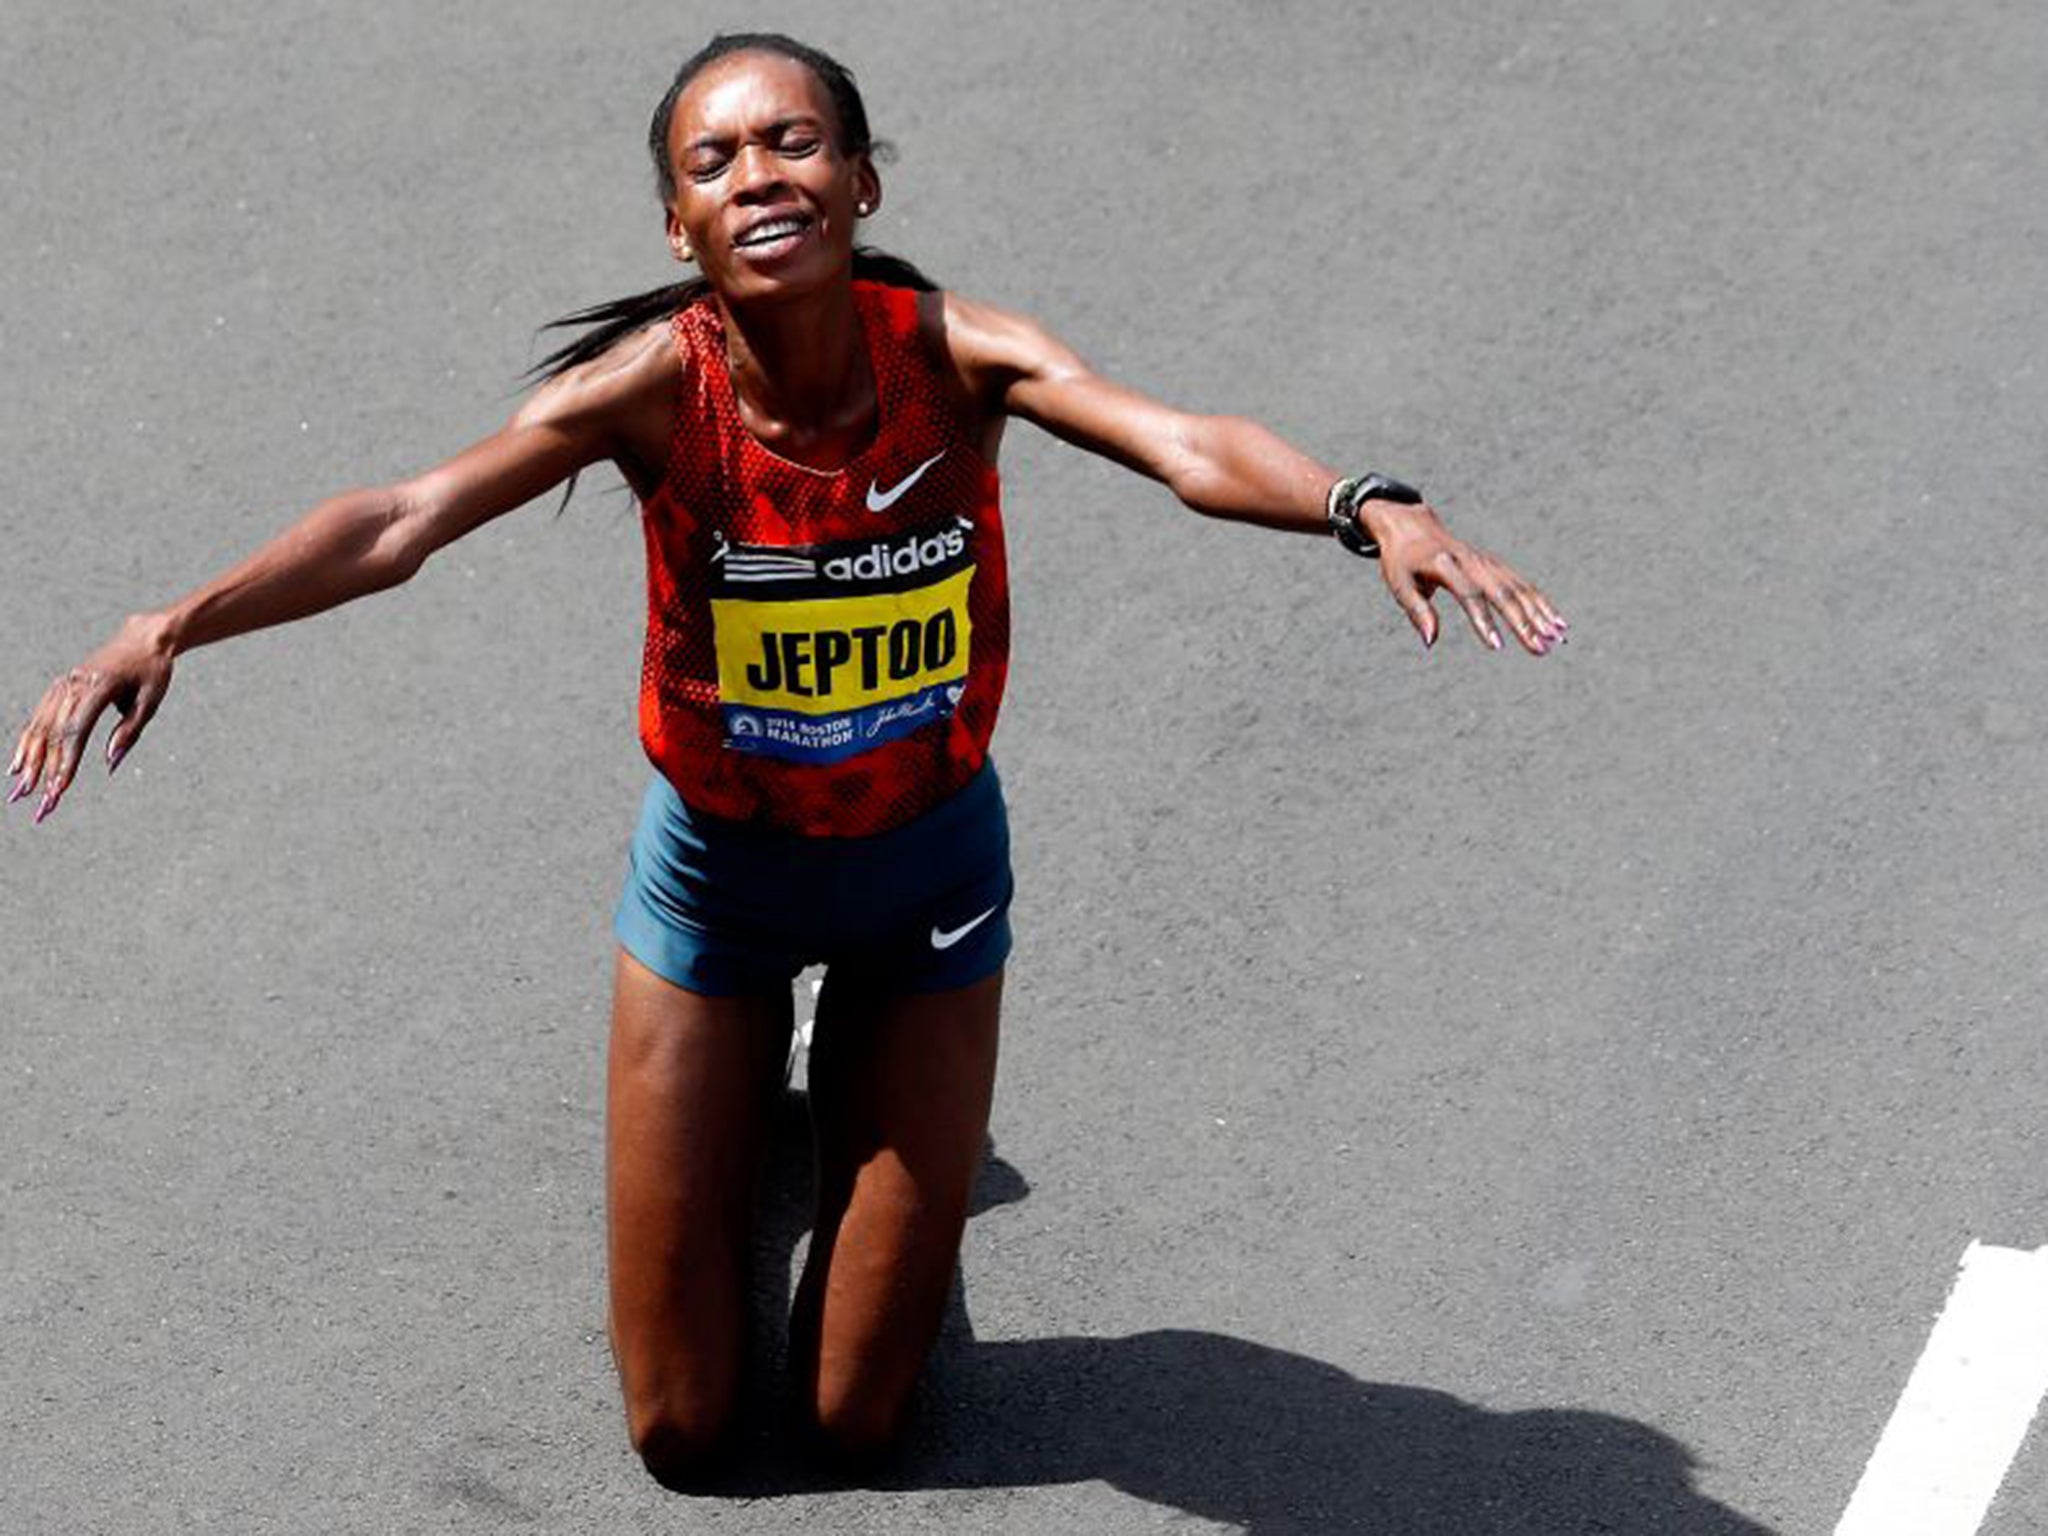 Kenya’s Rita Jeptoo has already been banned for doping